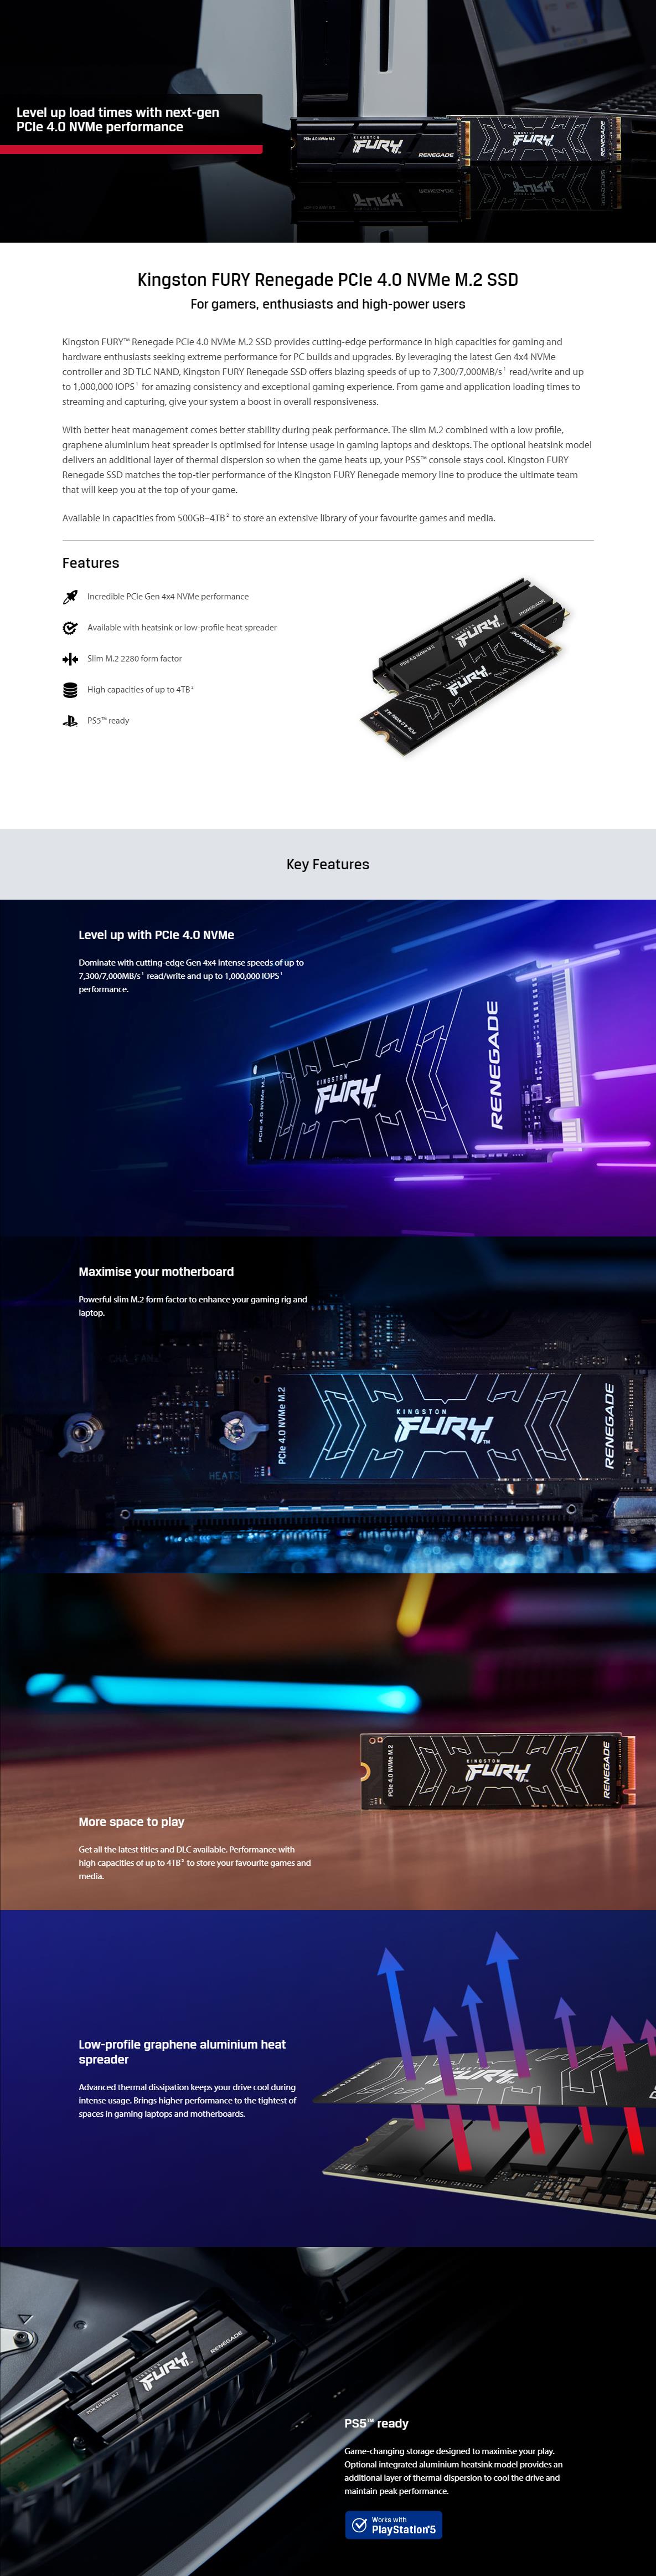 A large marketing image providing additional information about the product Kingston FURY Renegade w/Heatsink PCIe Gen4 NVMe M.2 SSD - 4TB - Additional alt info not provided